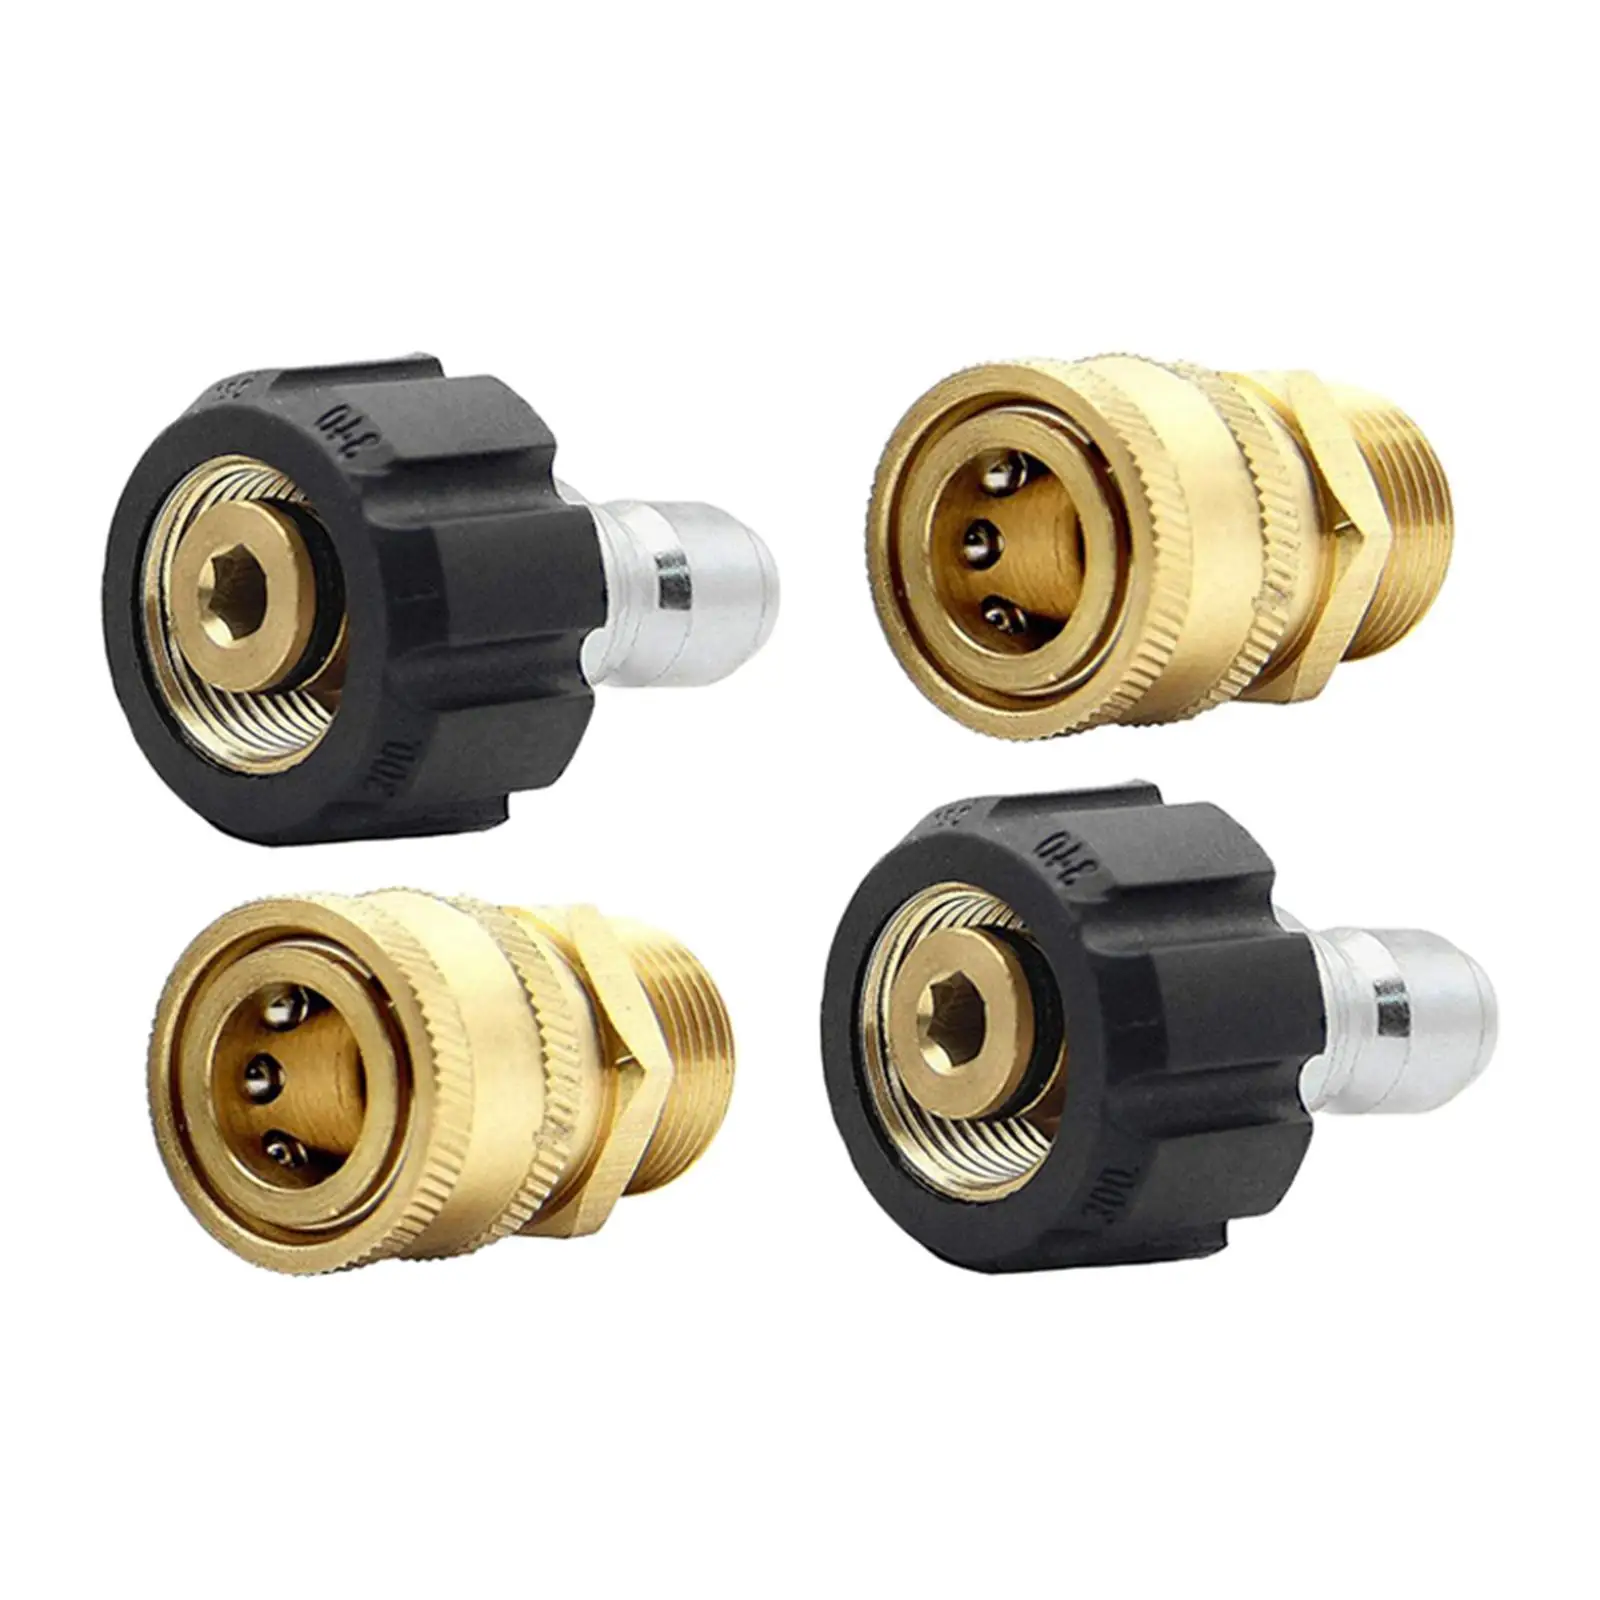 Pressure Washer Adapter Kit M22 to 3/8 inch Durable for Pressure Washer Gun